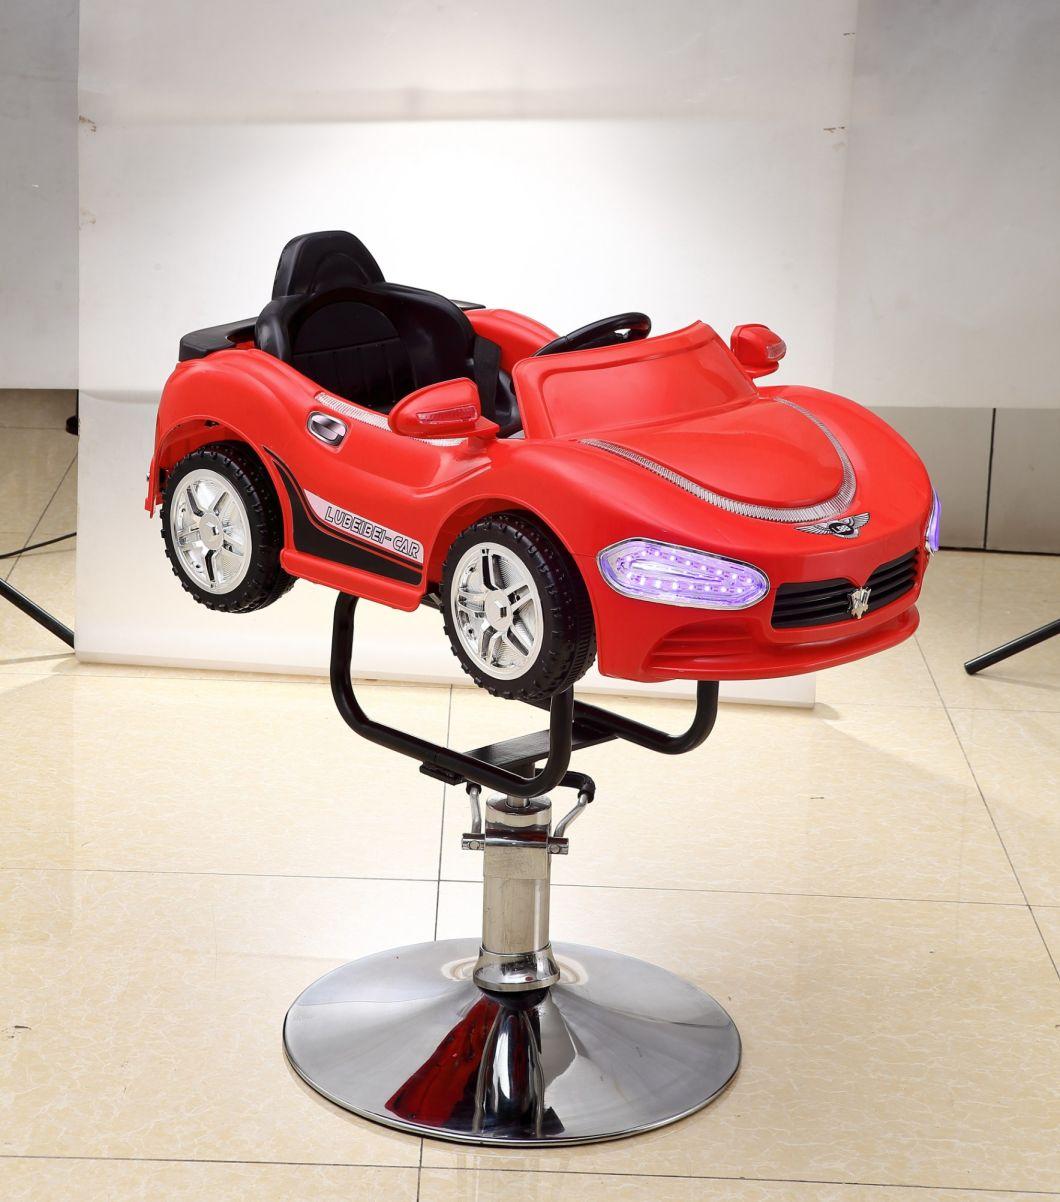 Hl-130 2021 Hot Sale Children Barber Chair / Salon Chair for Kids / Car Shape Barber Chair China